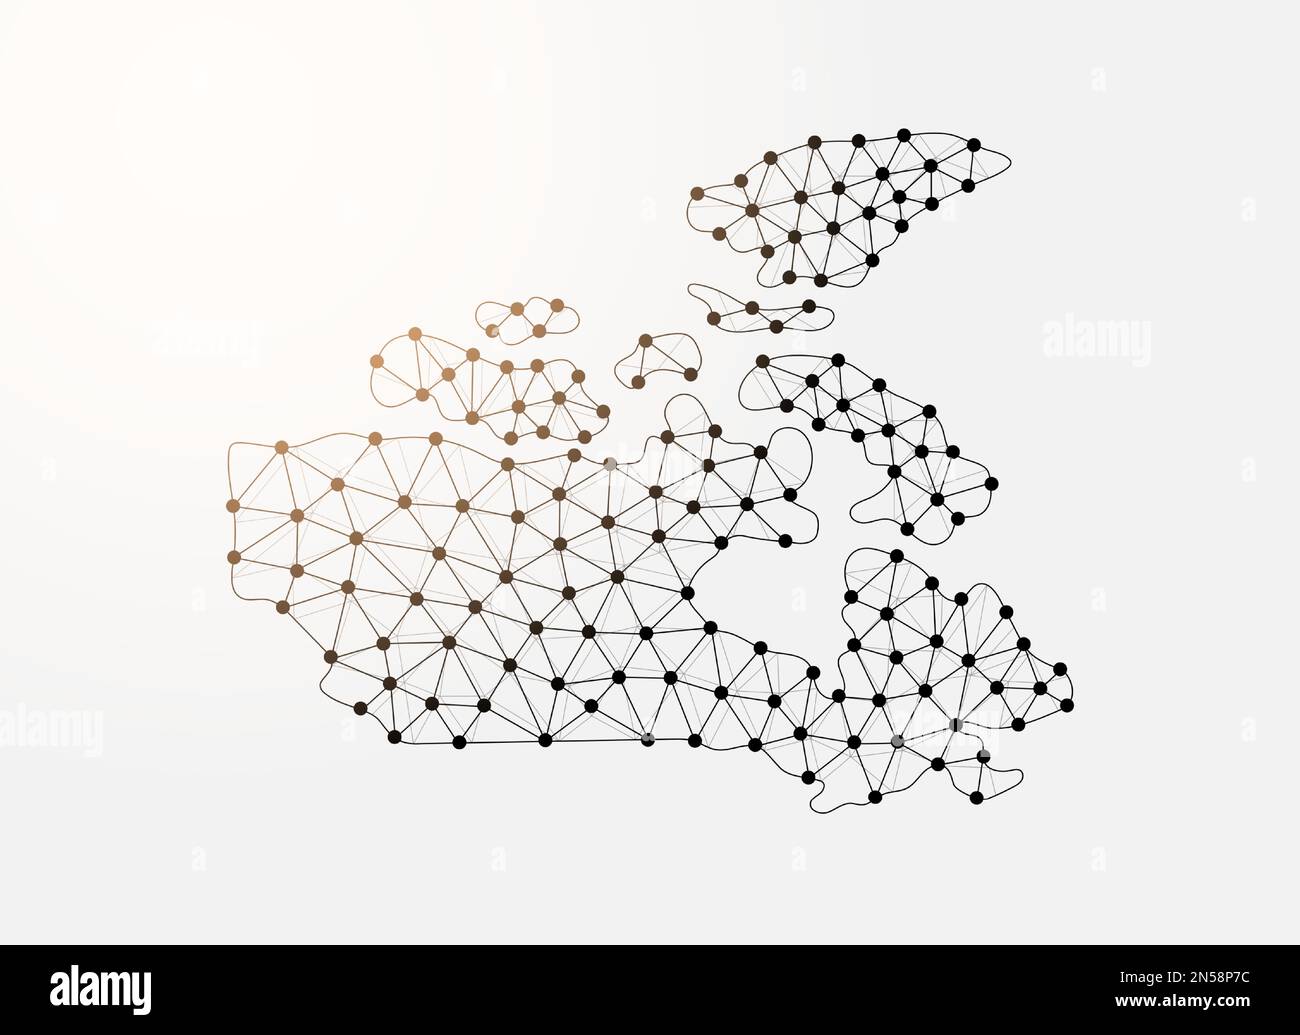 Canada low poly symbol with connected dots. Canada map design vector illustration. Country map polygonal wireframe Illustration for website design Stock Vector